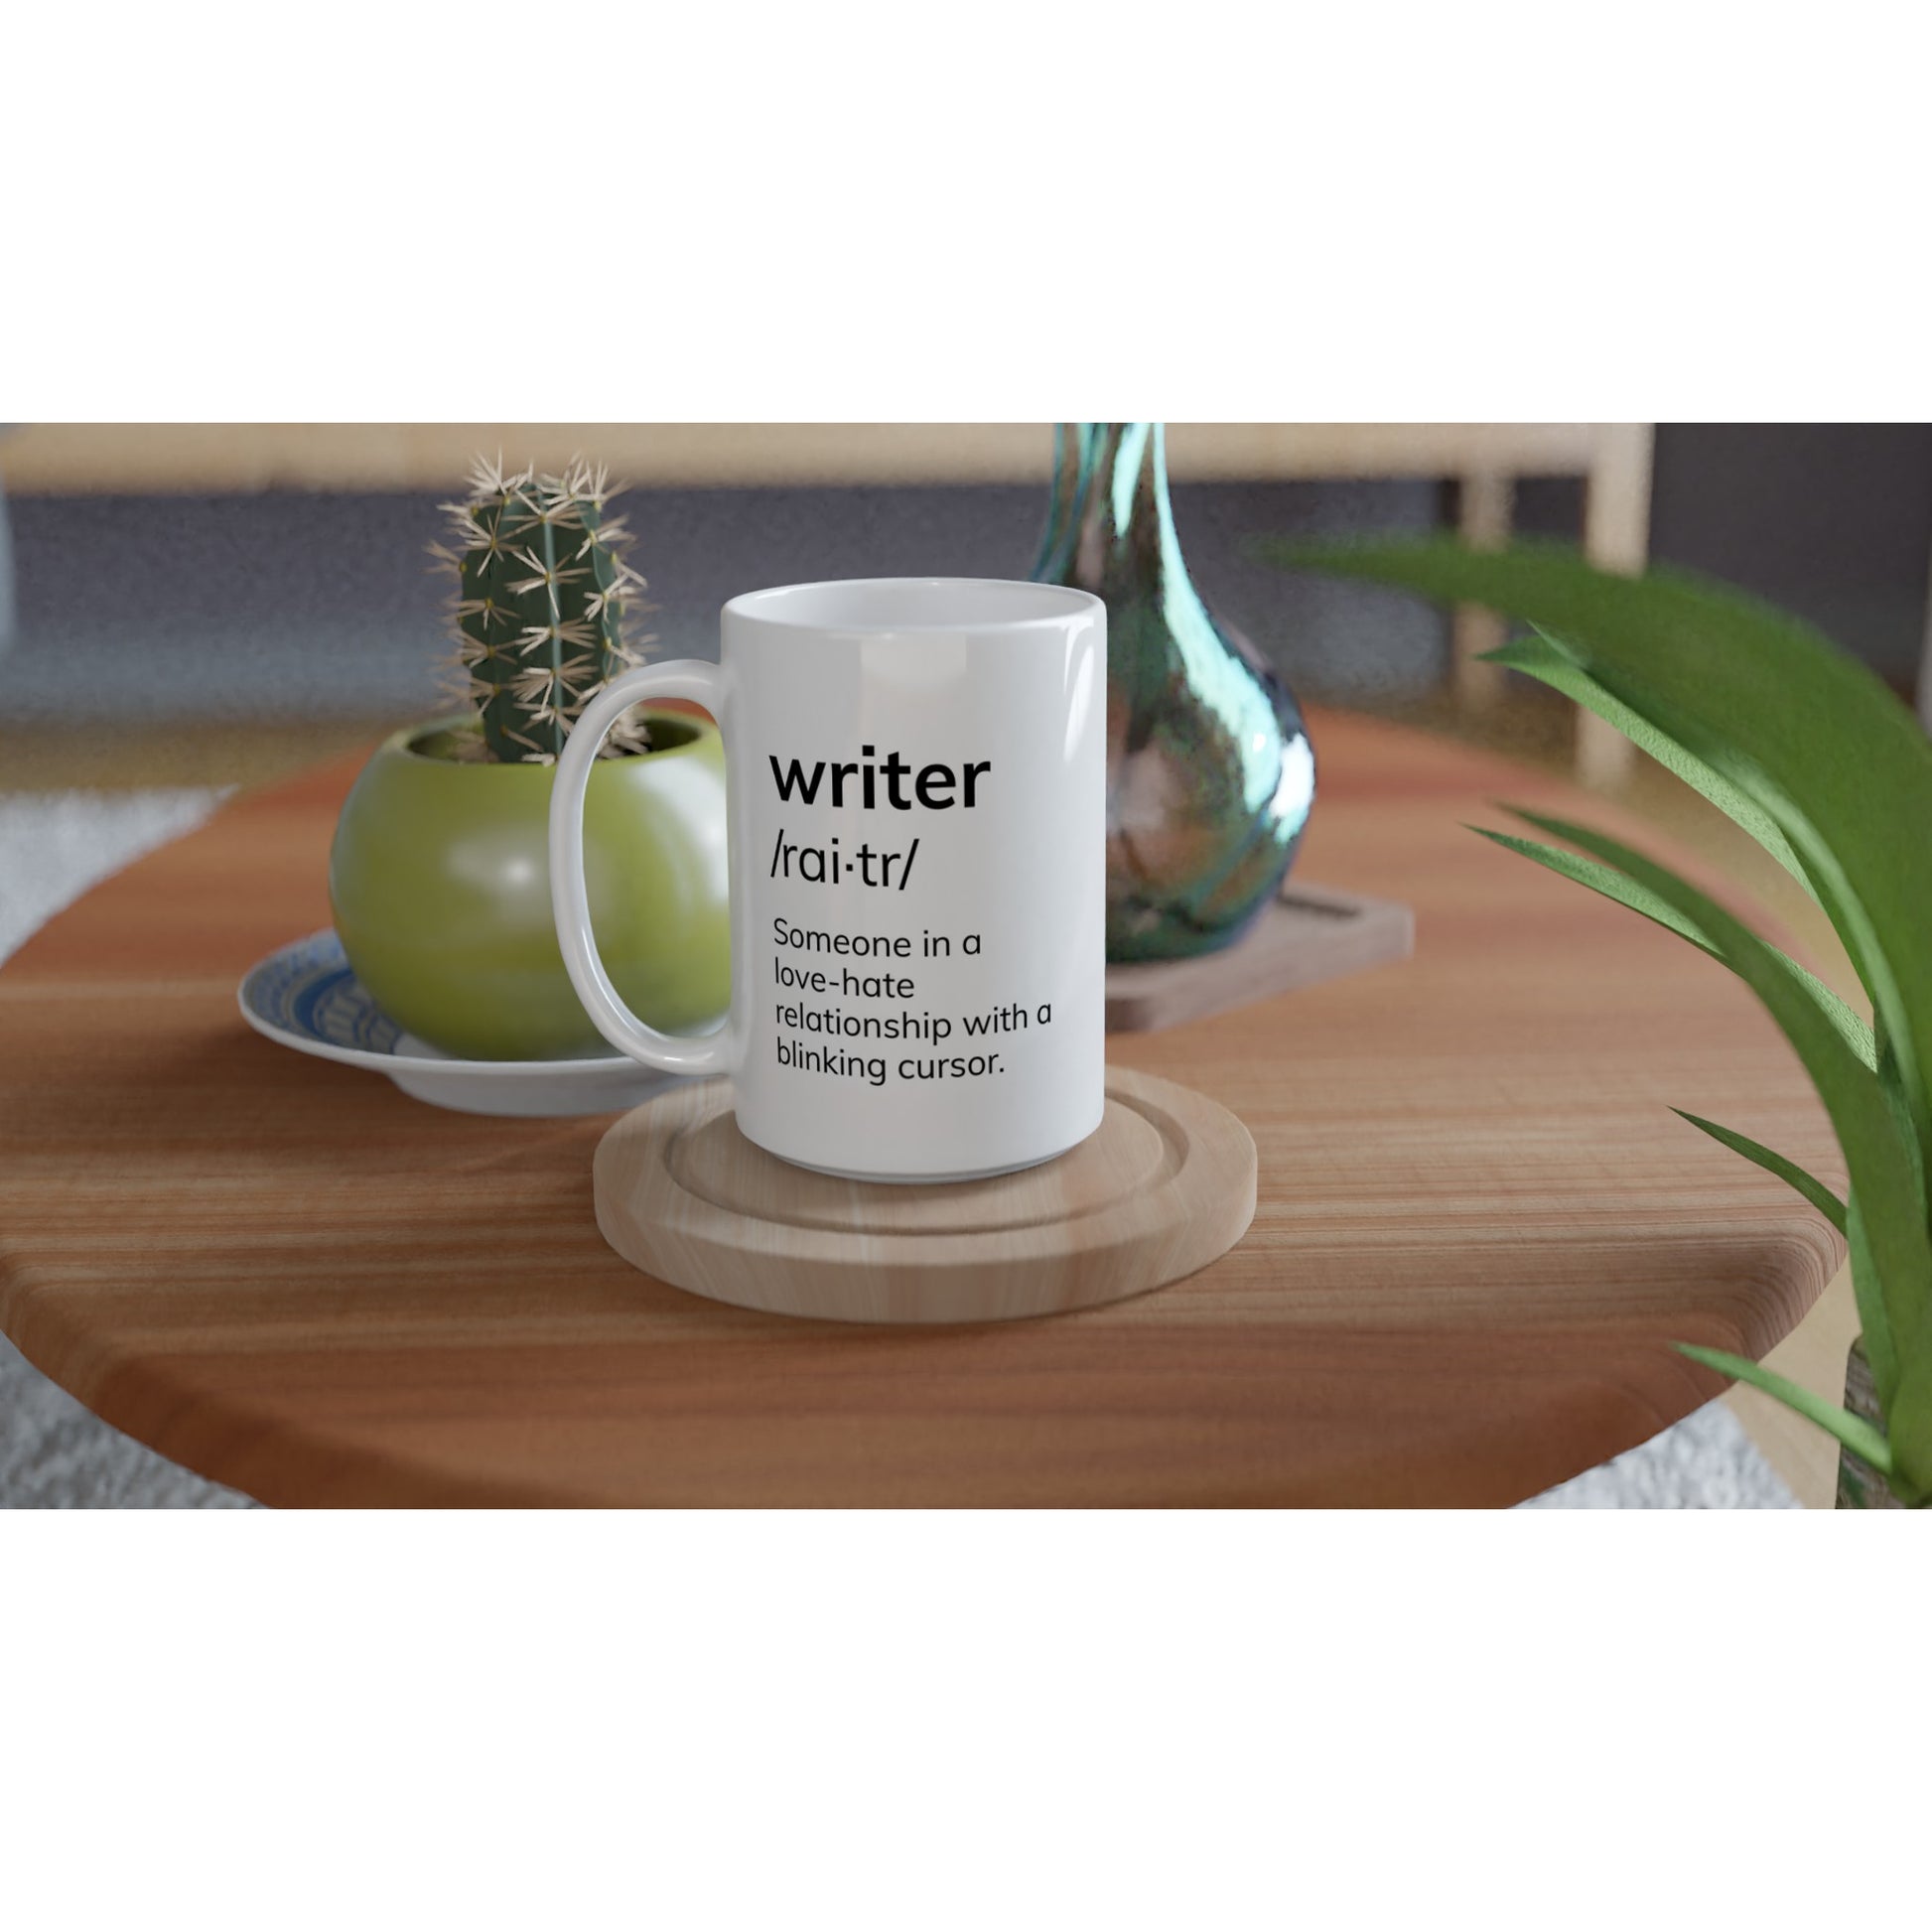 A white Writing Themed Mug with the word "writer: Someone in a love-hate relationship with a blinking cursor" on it.